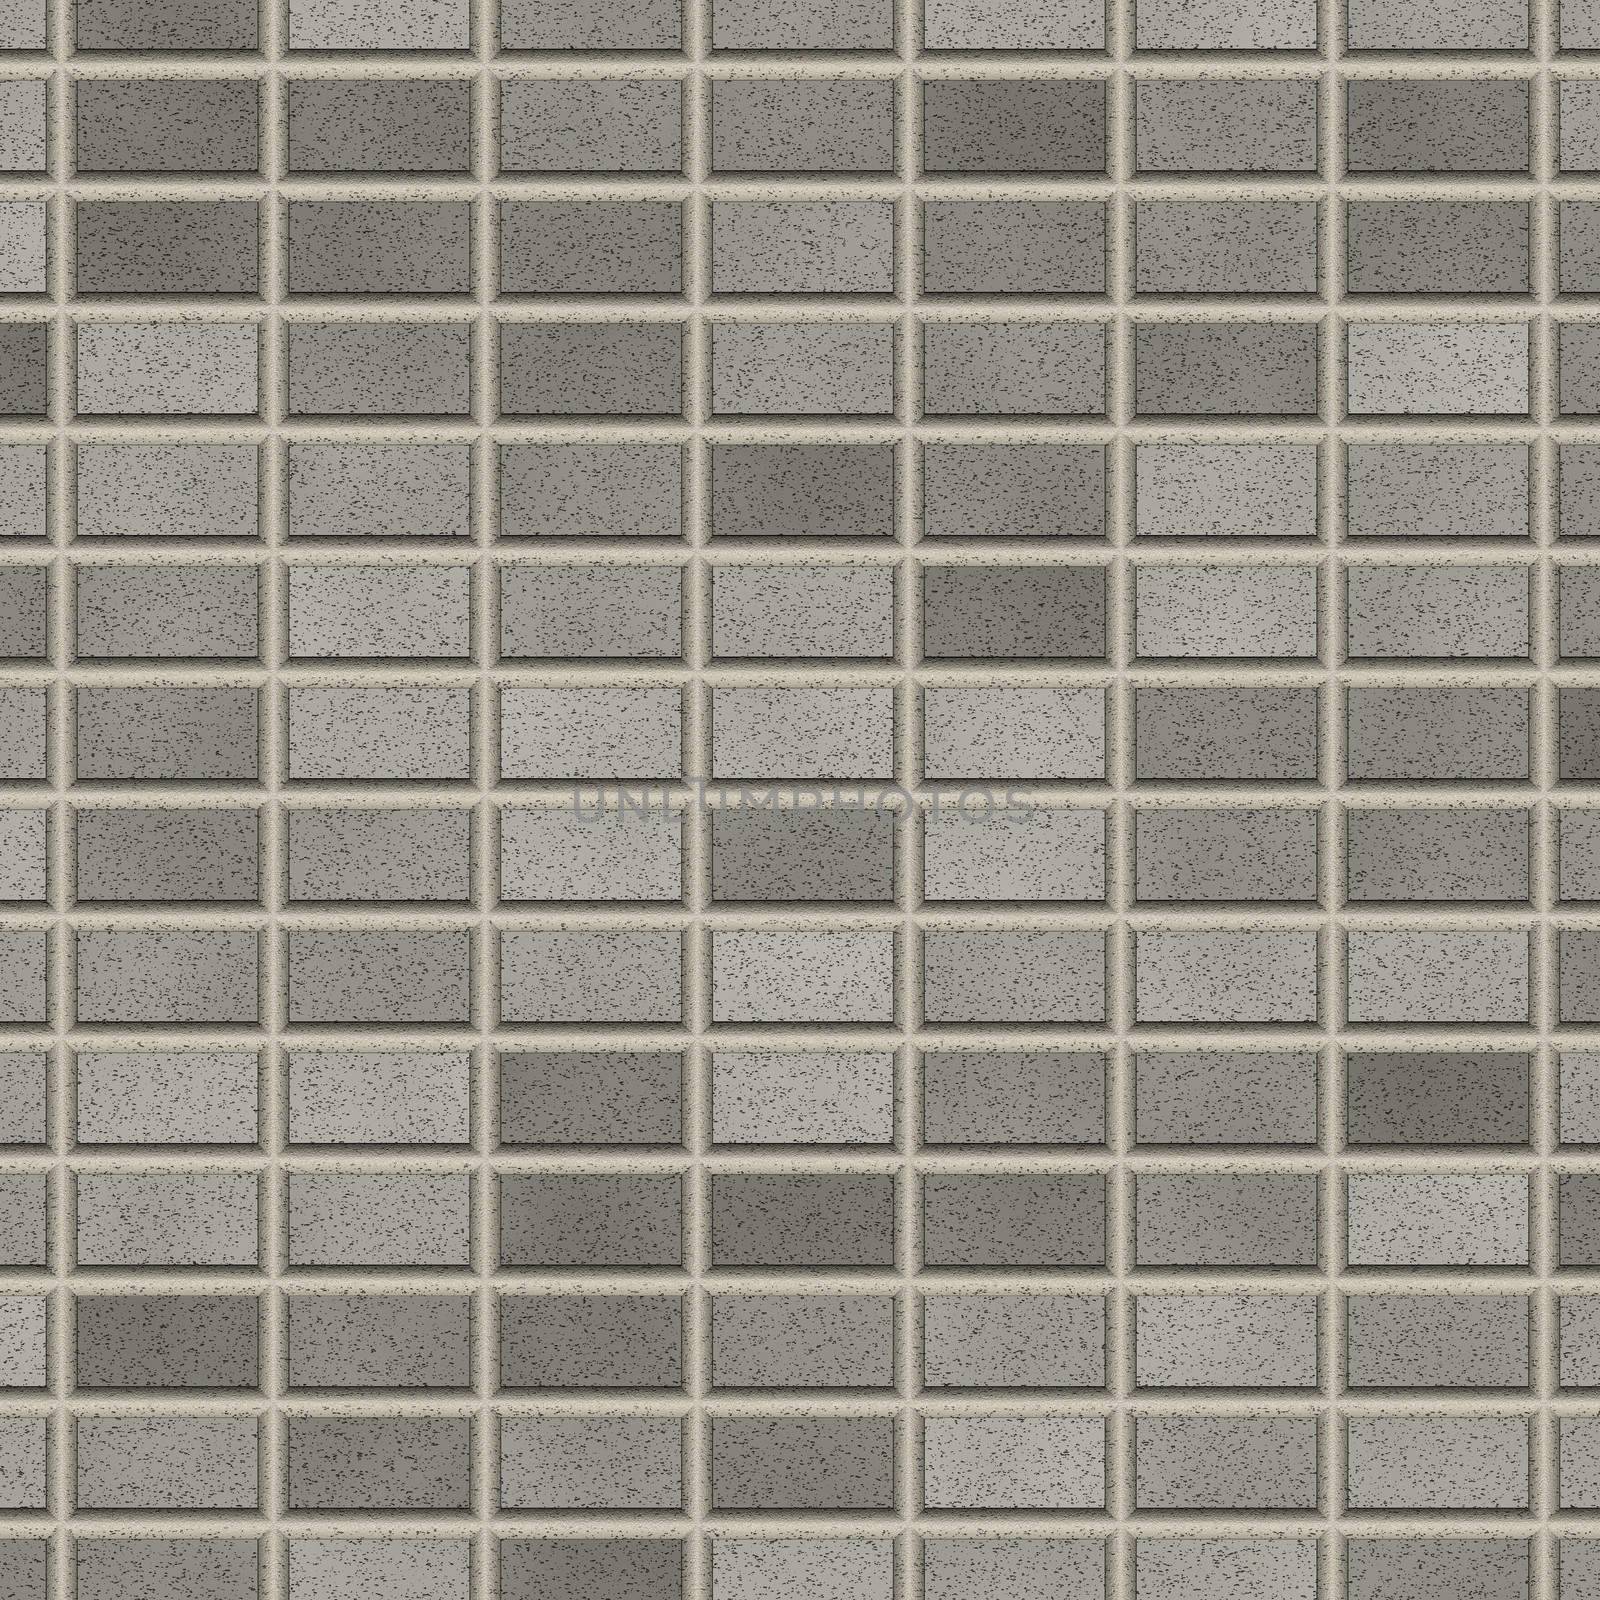 stone wall background, seamless repeat pattern tile